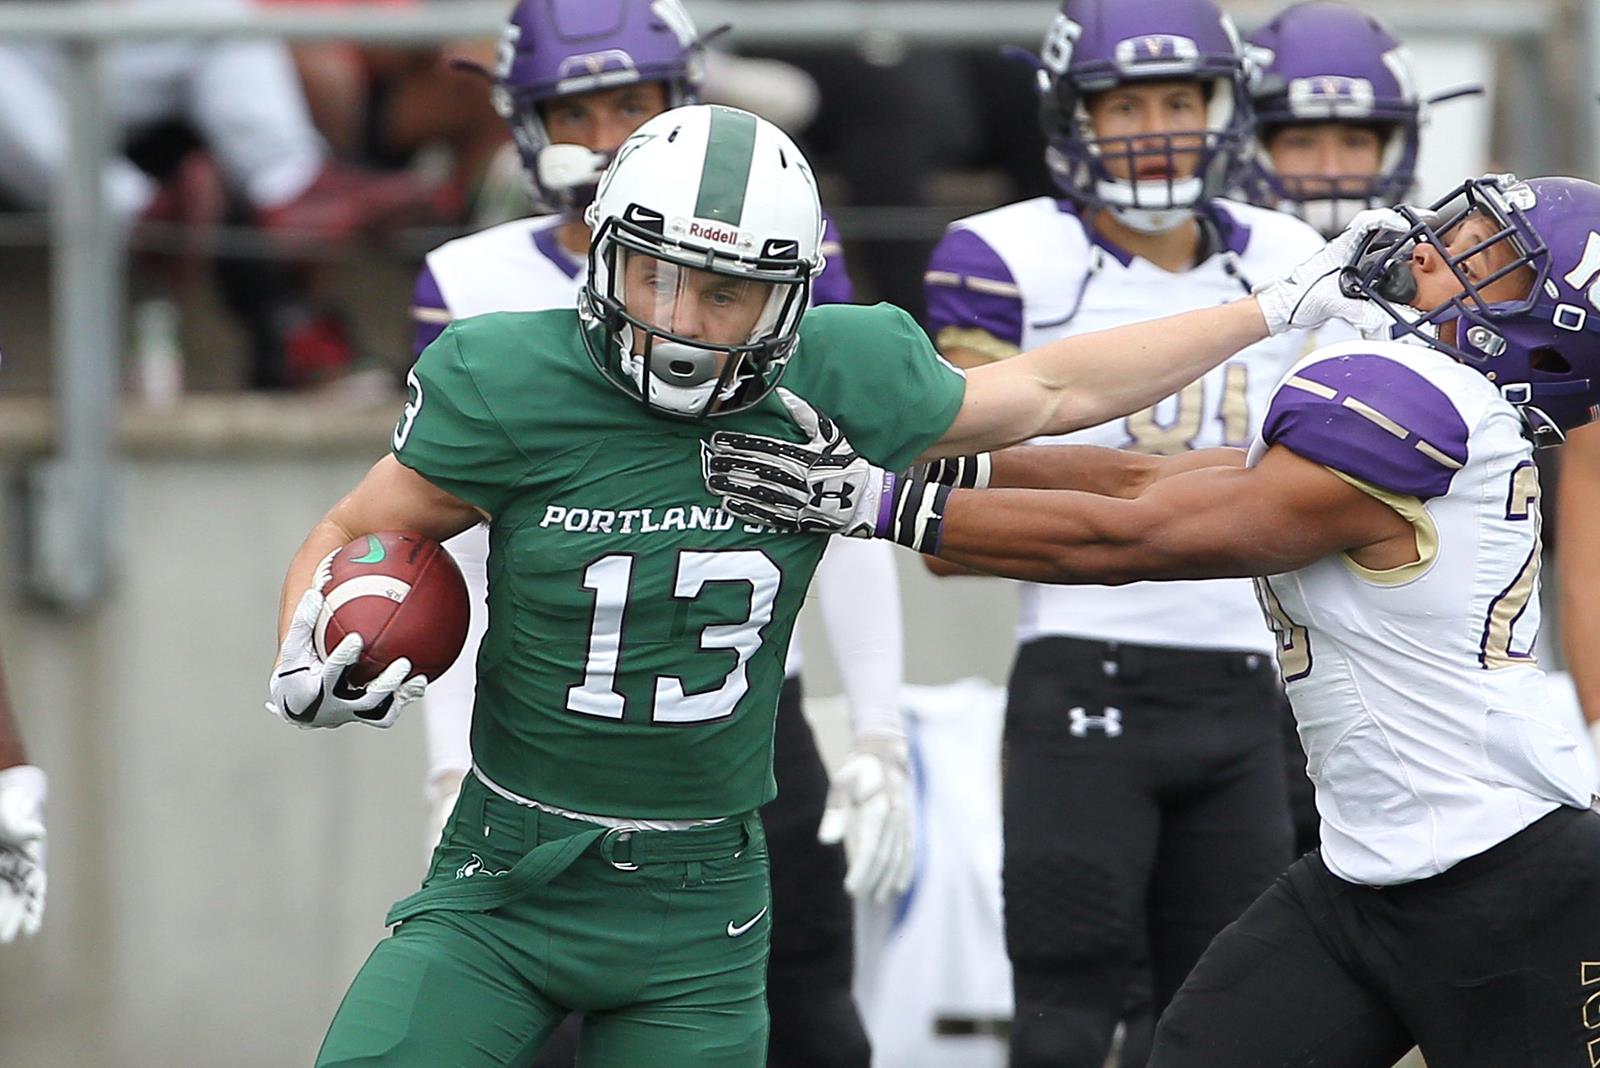 Beau Kelly the wide receiver from Portland State recently sat down with Evan Willsmore from NFL Draft Diamonds